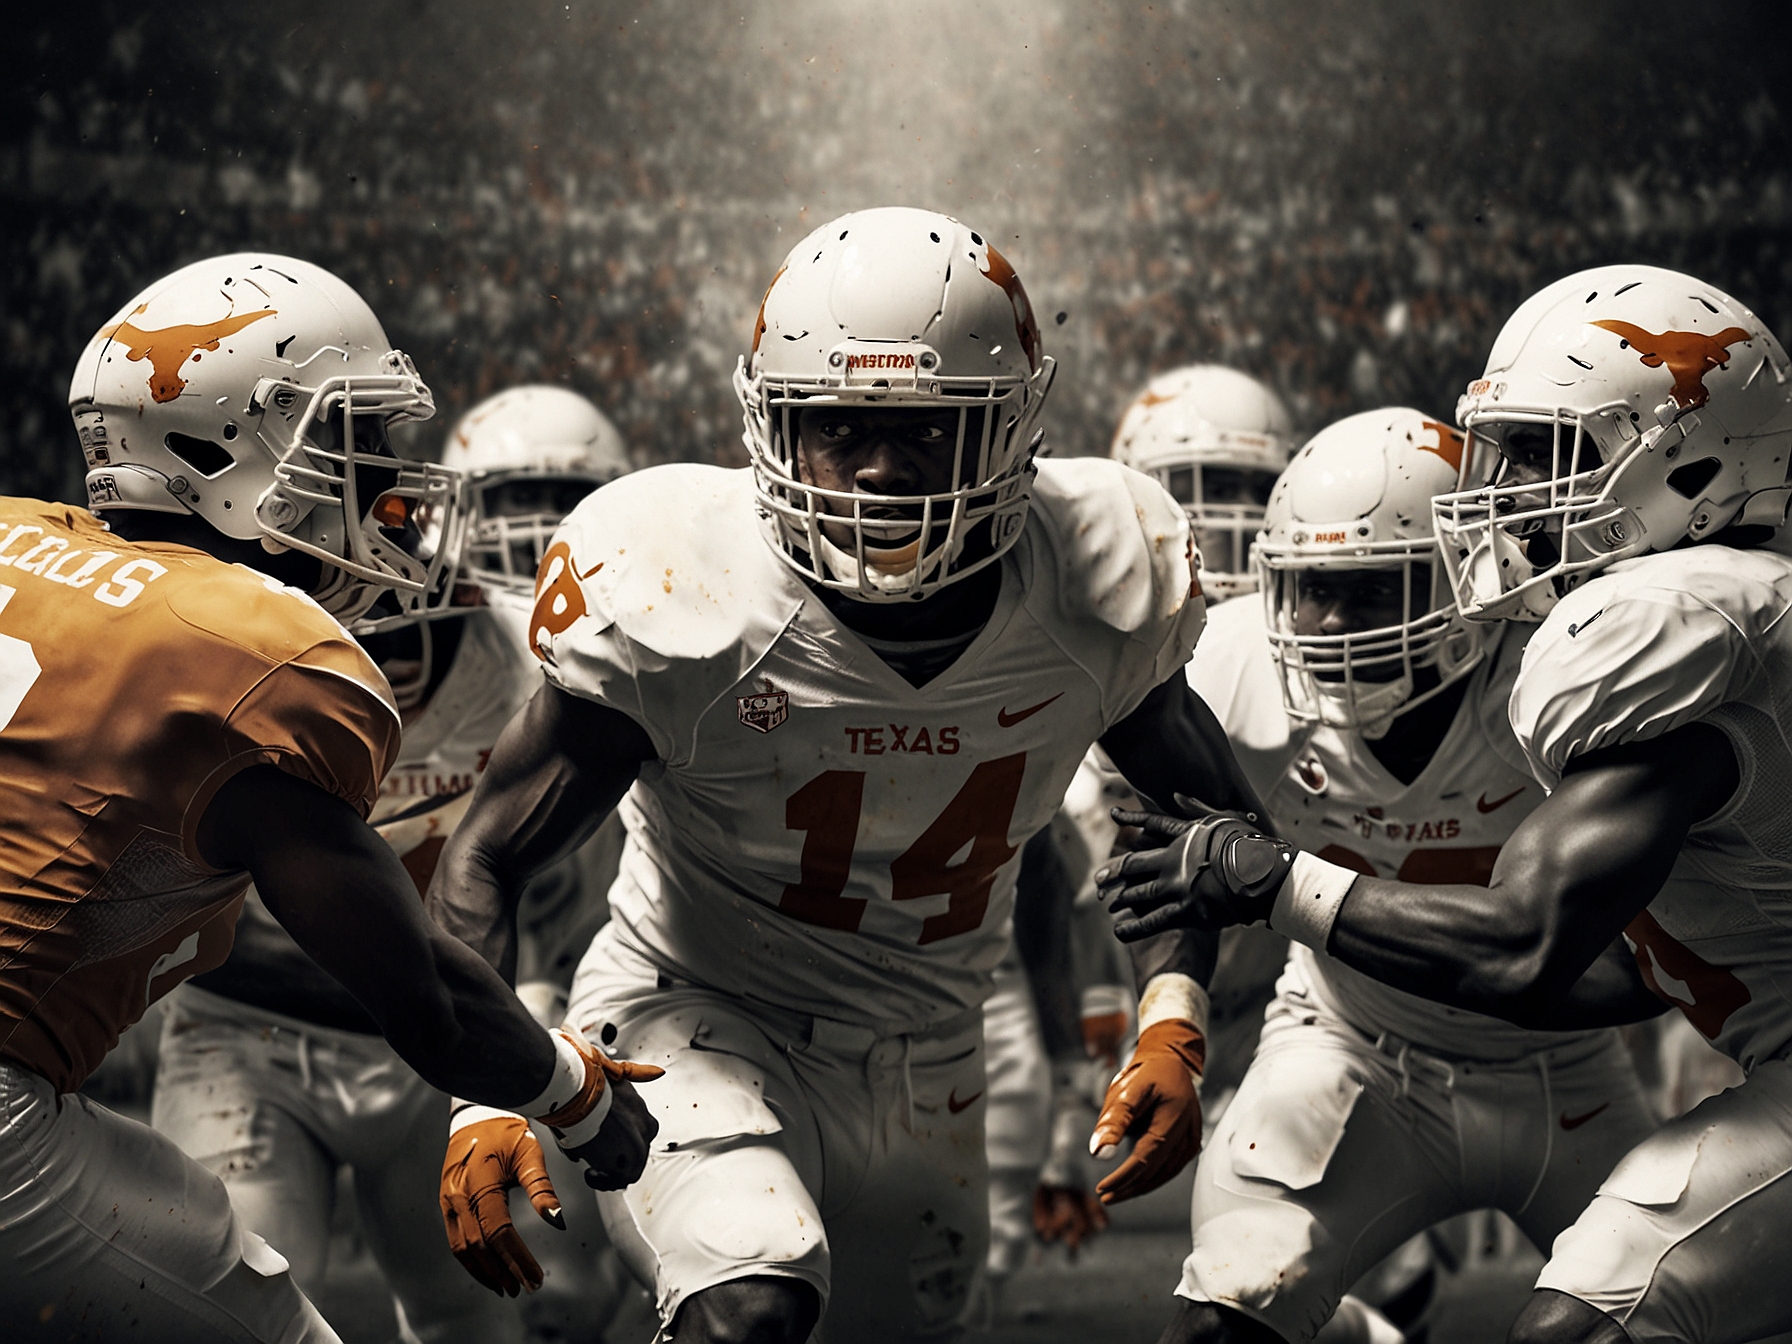 Image of Texas Longhorns football players in action, showcasing their new competition against top SEC teams, representing the high level of intensity and preparation required.